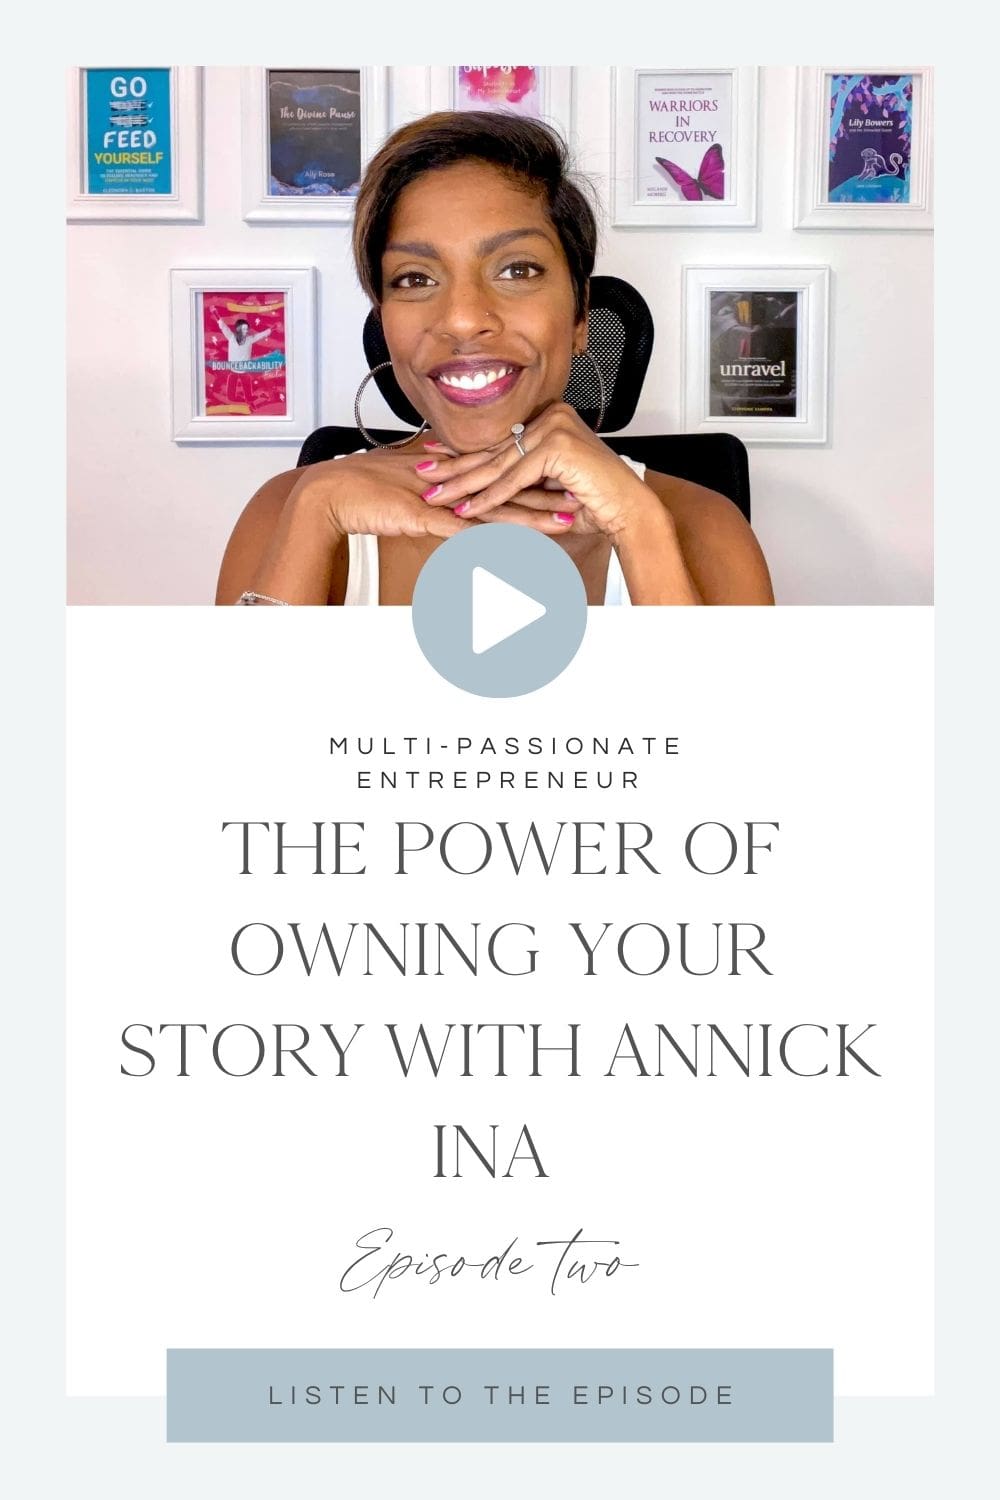 The power of owning your story by Annick Ina